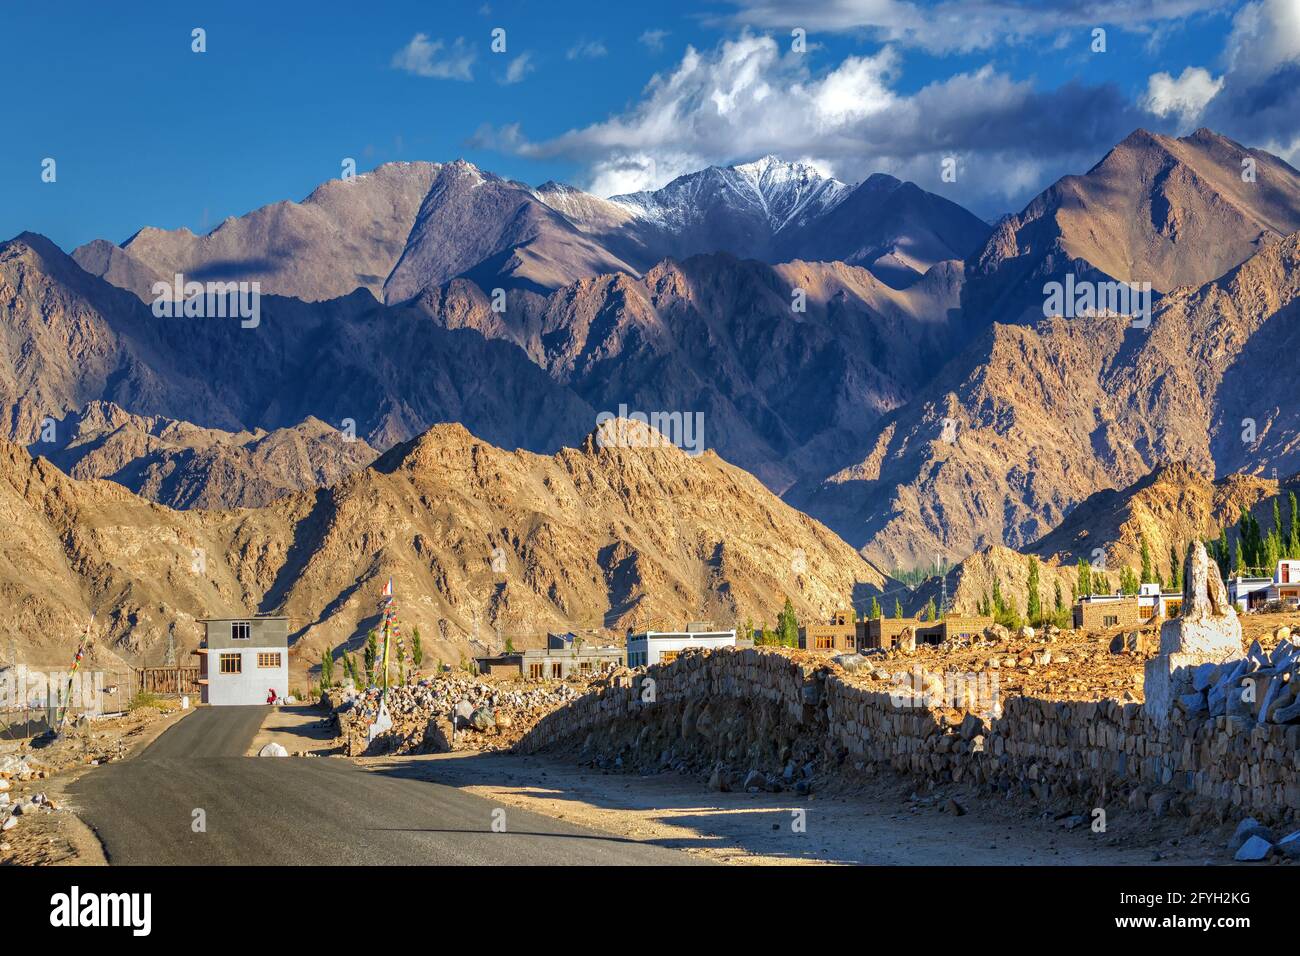 Highway of Leh with rocky mountains and snow peak with blue sky in background, Leh, Ladakh, Jammu and Kashmir, India Stock Photo